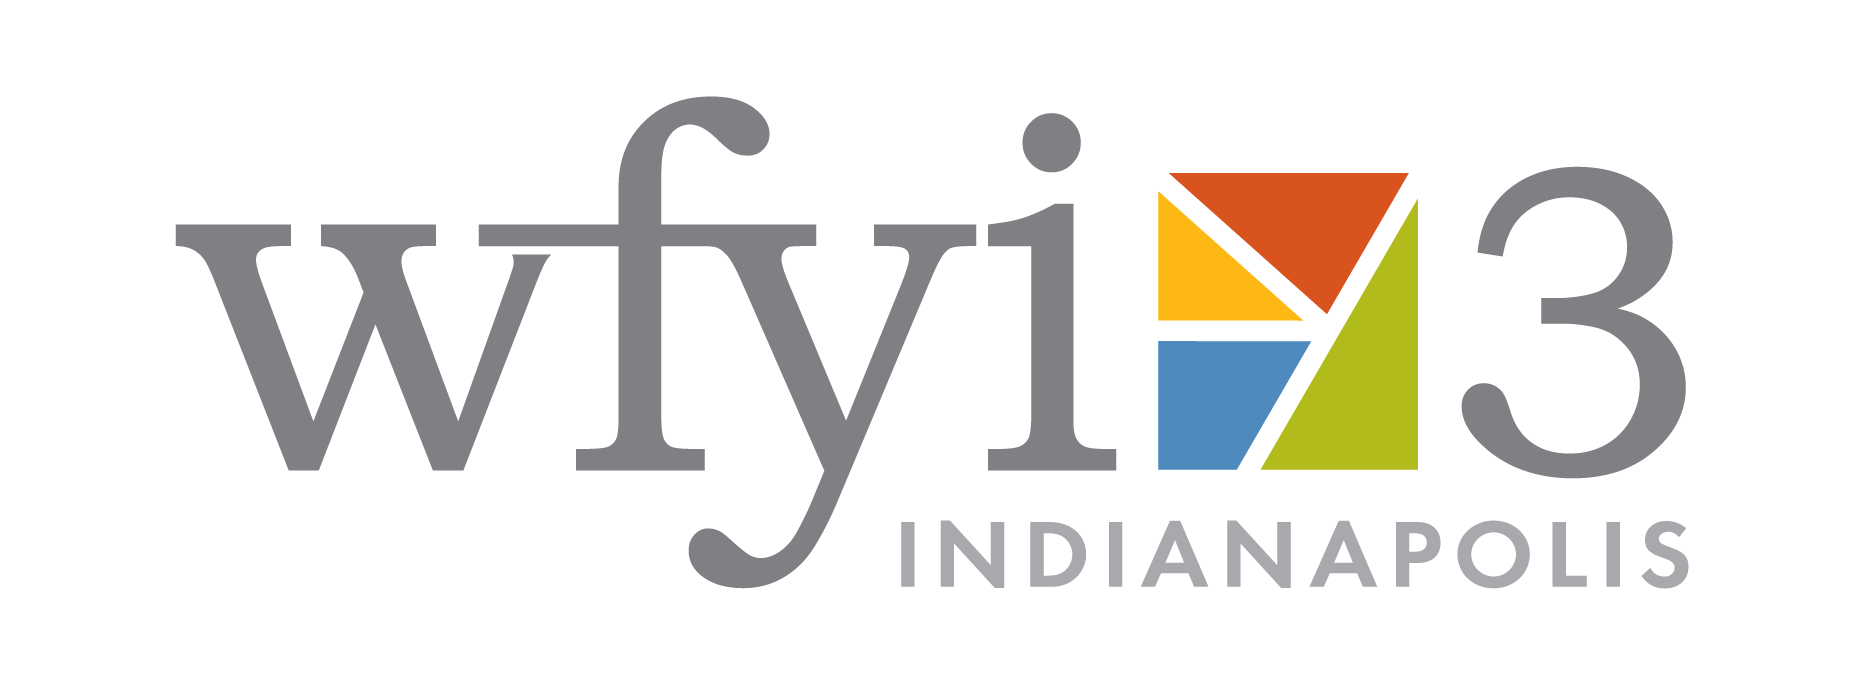 https://www.wfyi.org/images/WFYI-3_Ind.png